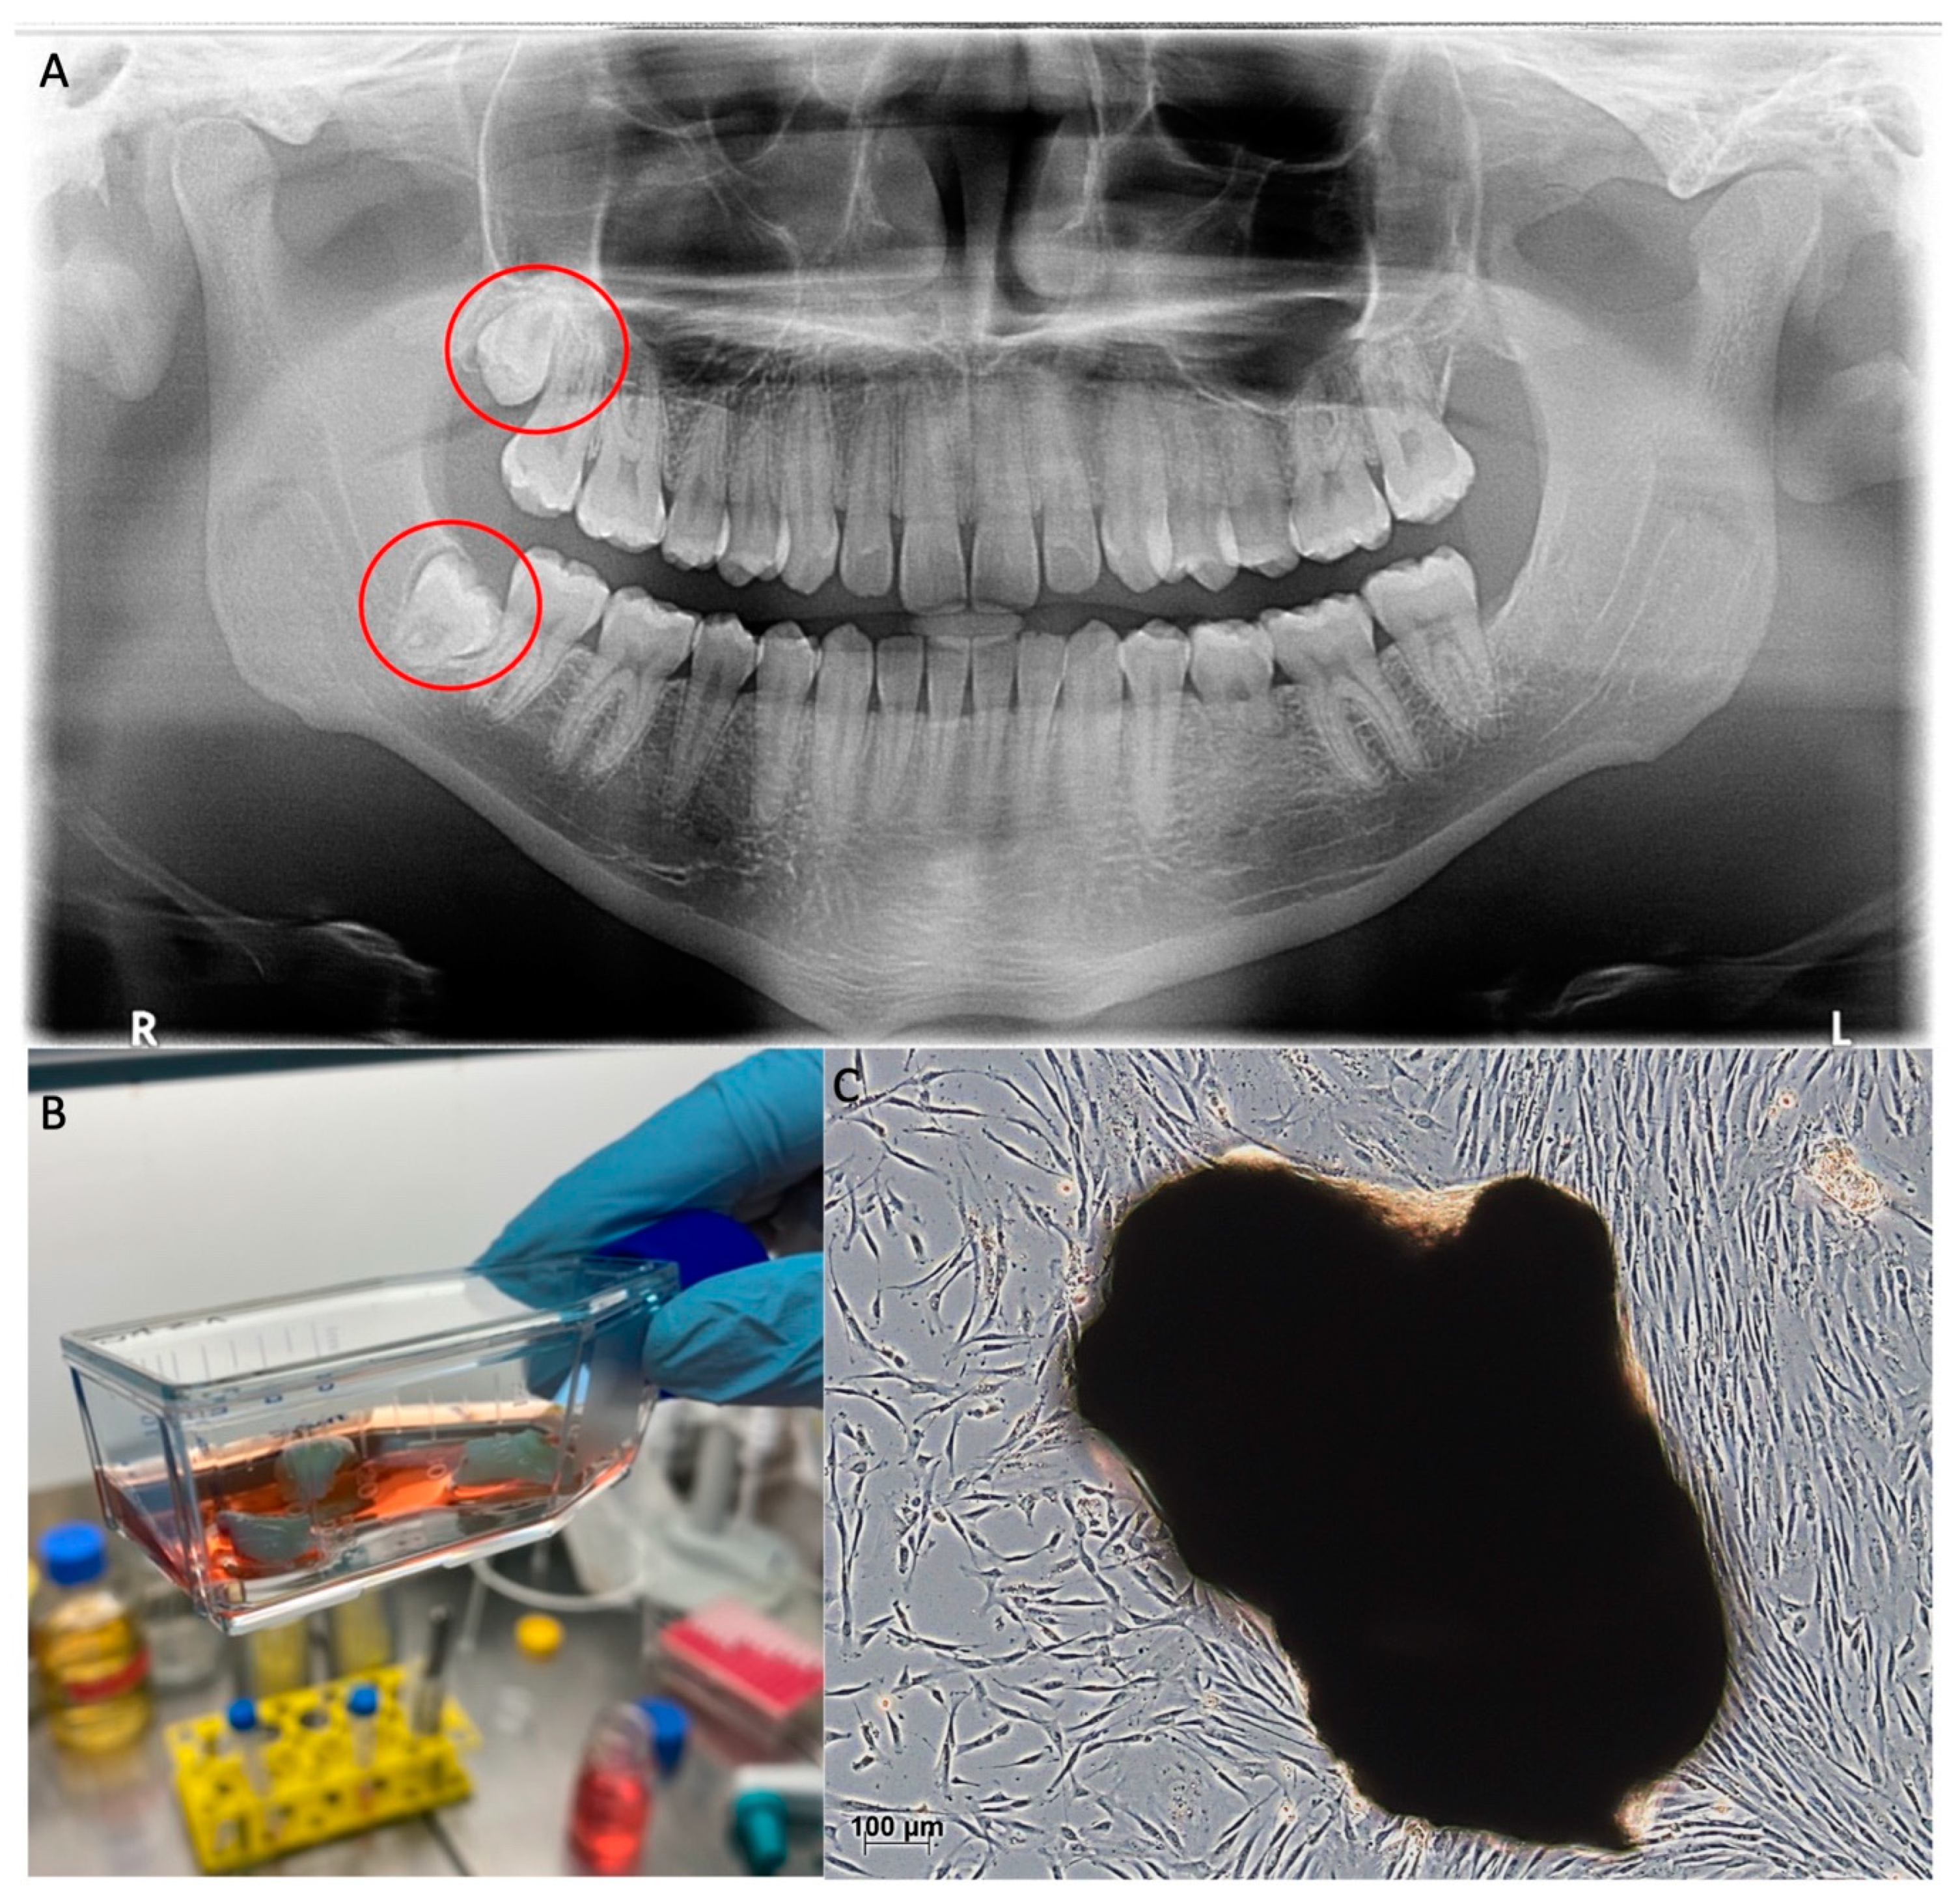 Vitamin D deficiency indicated by pulp tooth shape (X ray)– Nov